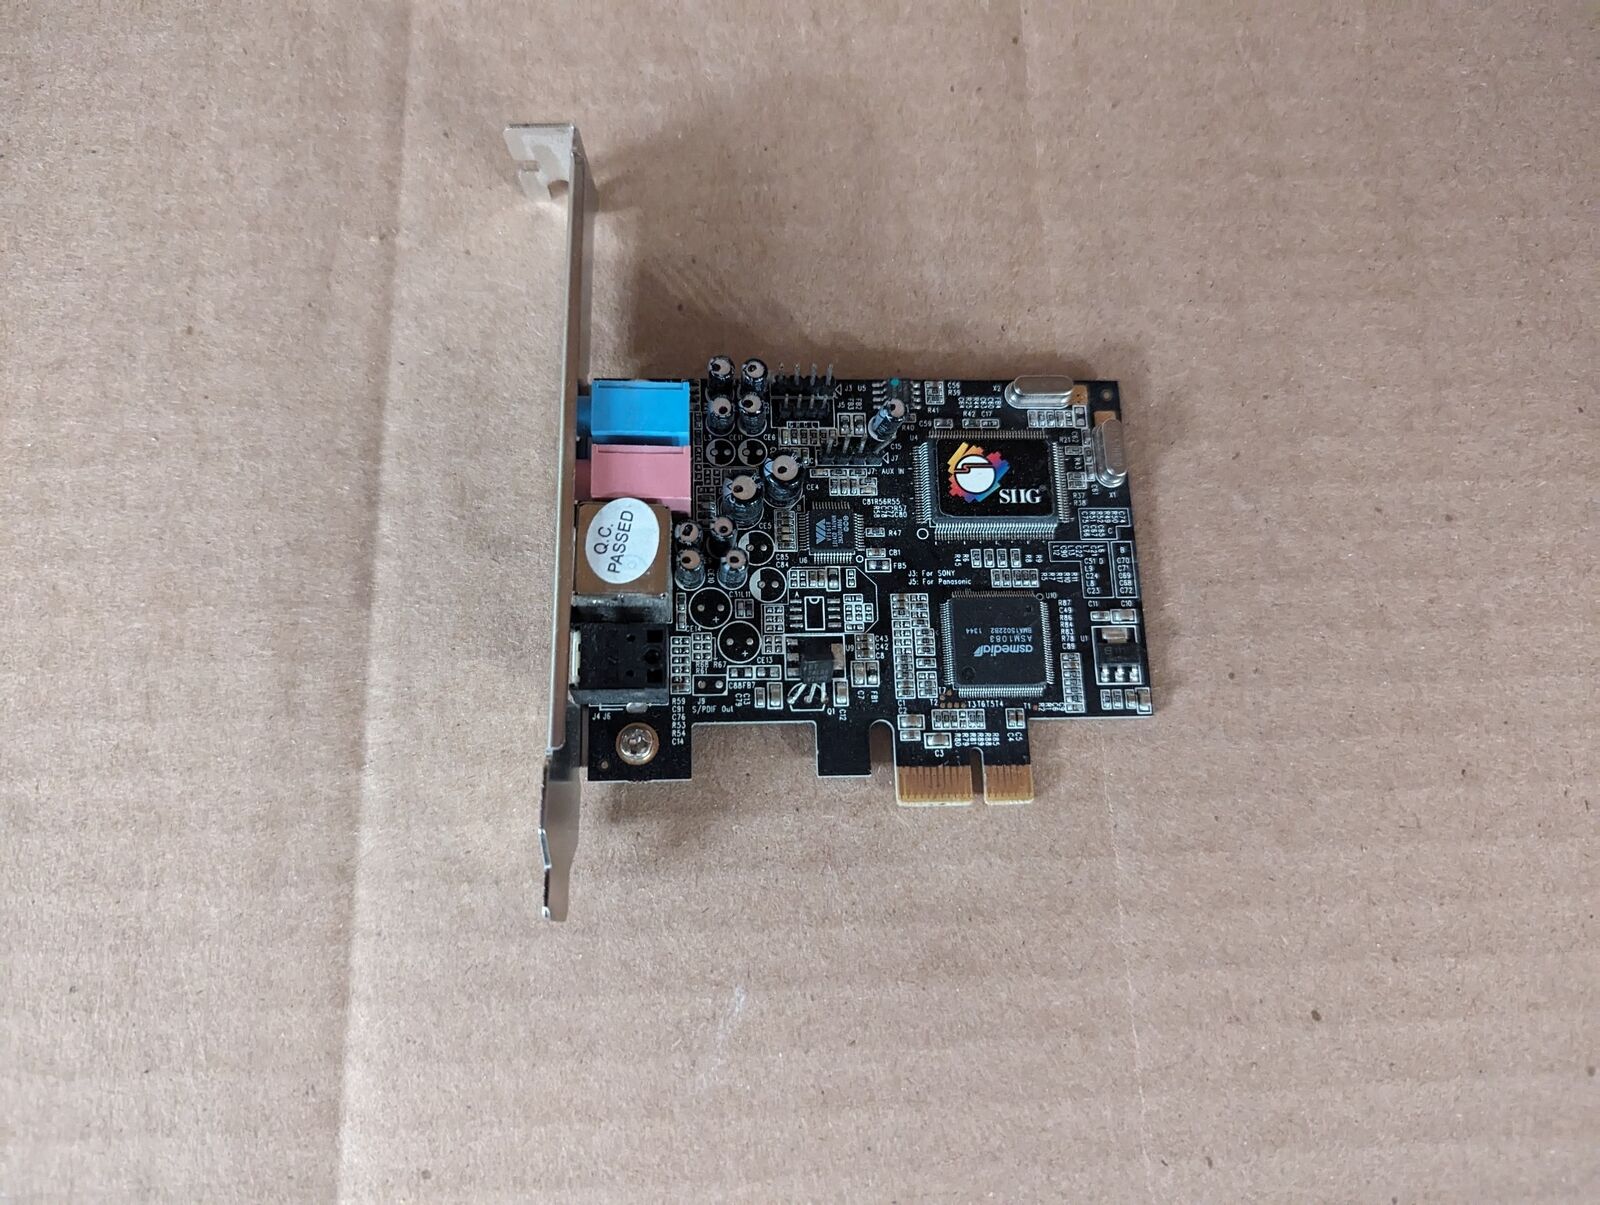 SIIG SOUNDWAVE 5.1 IC-510111-S2 PCI EXPRESS X1 SOUND CARD H2-1(7)